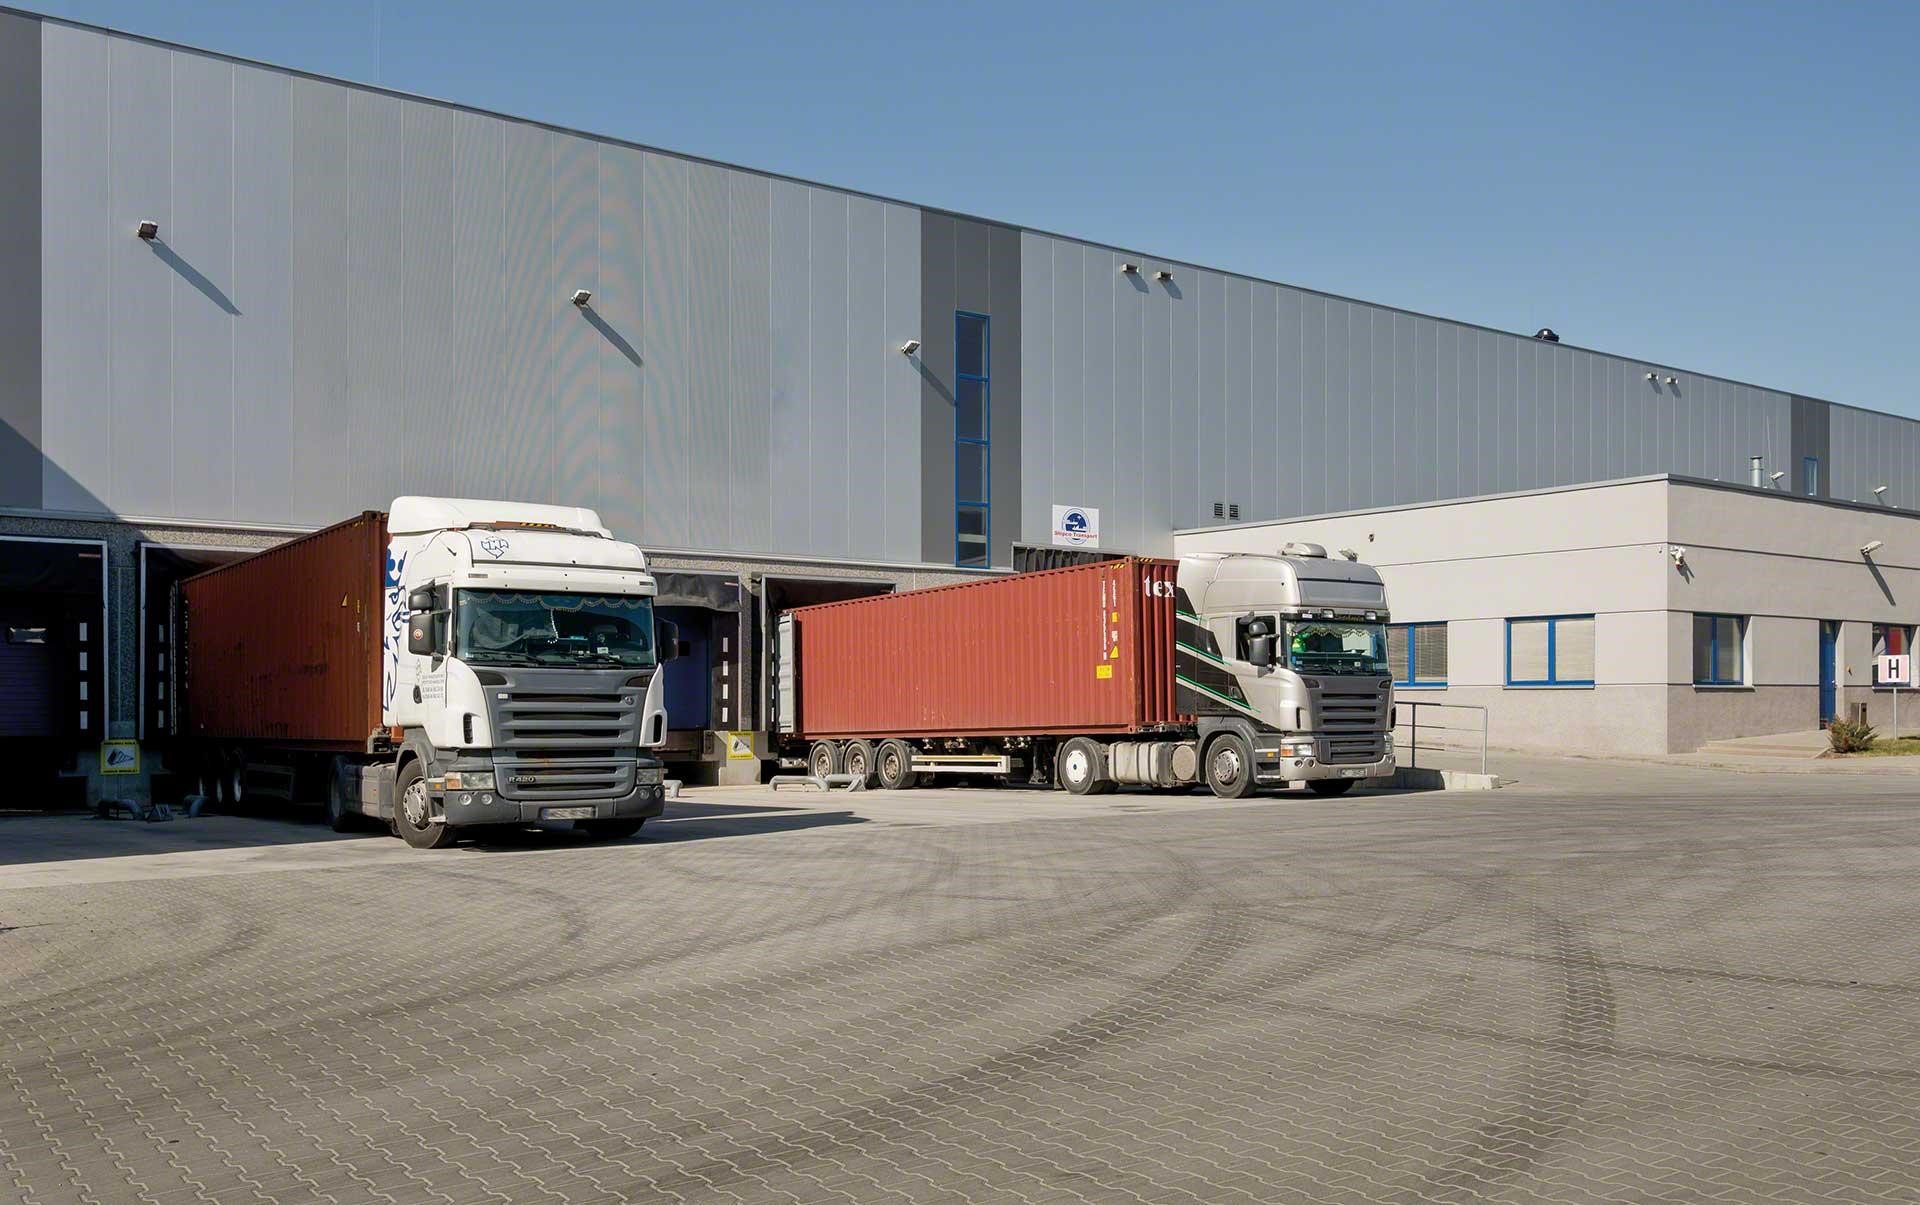 Lorries loading and unloading goods at the warehouse docks